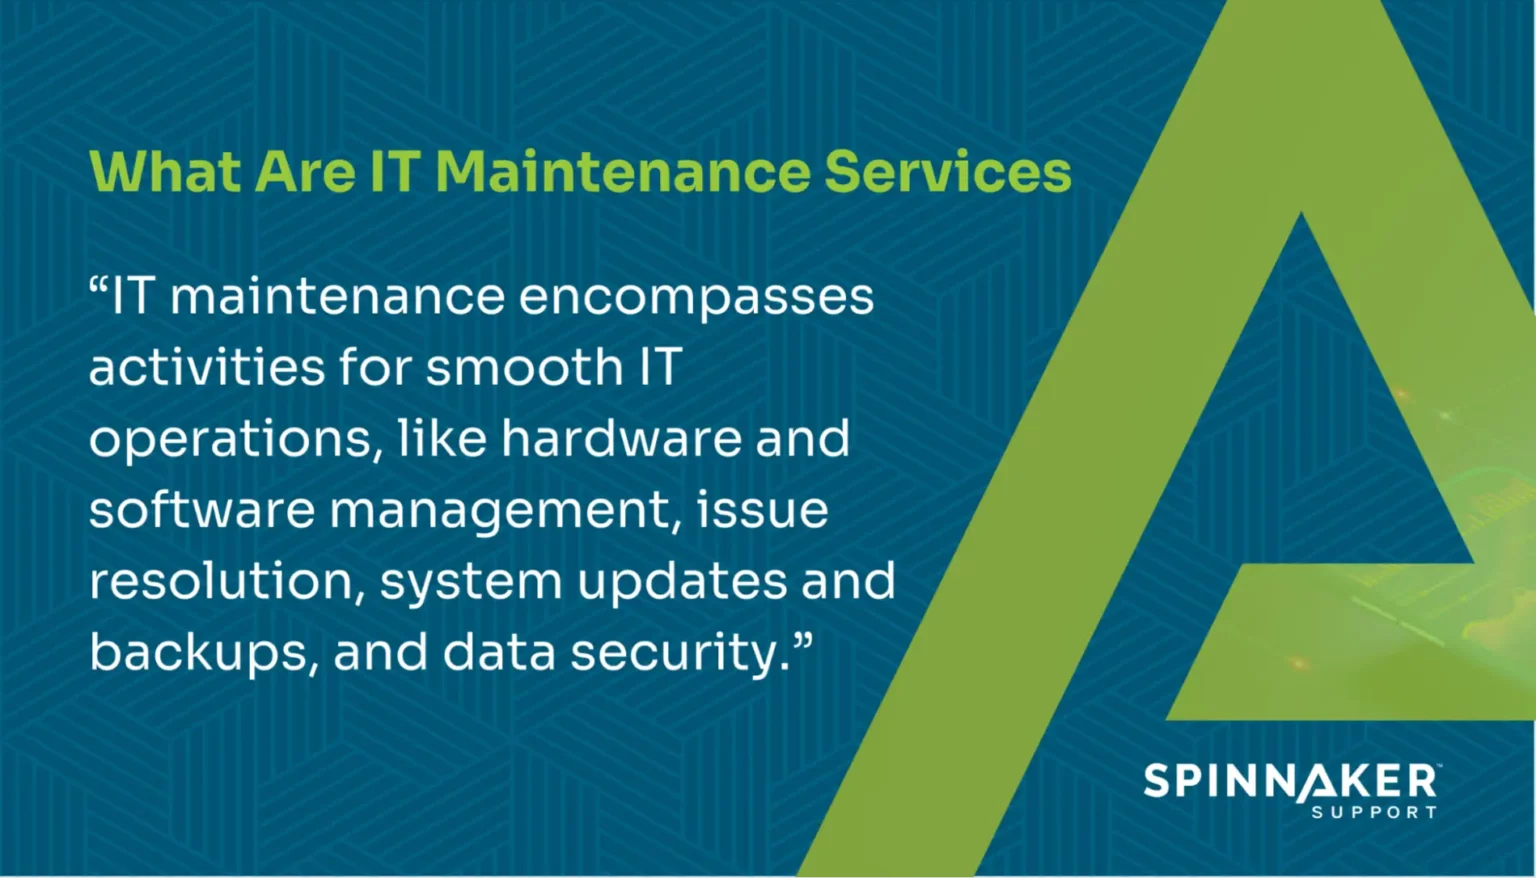 Definition of IT maintenance services